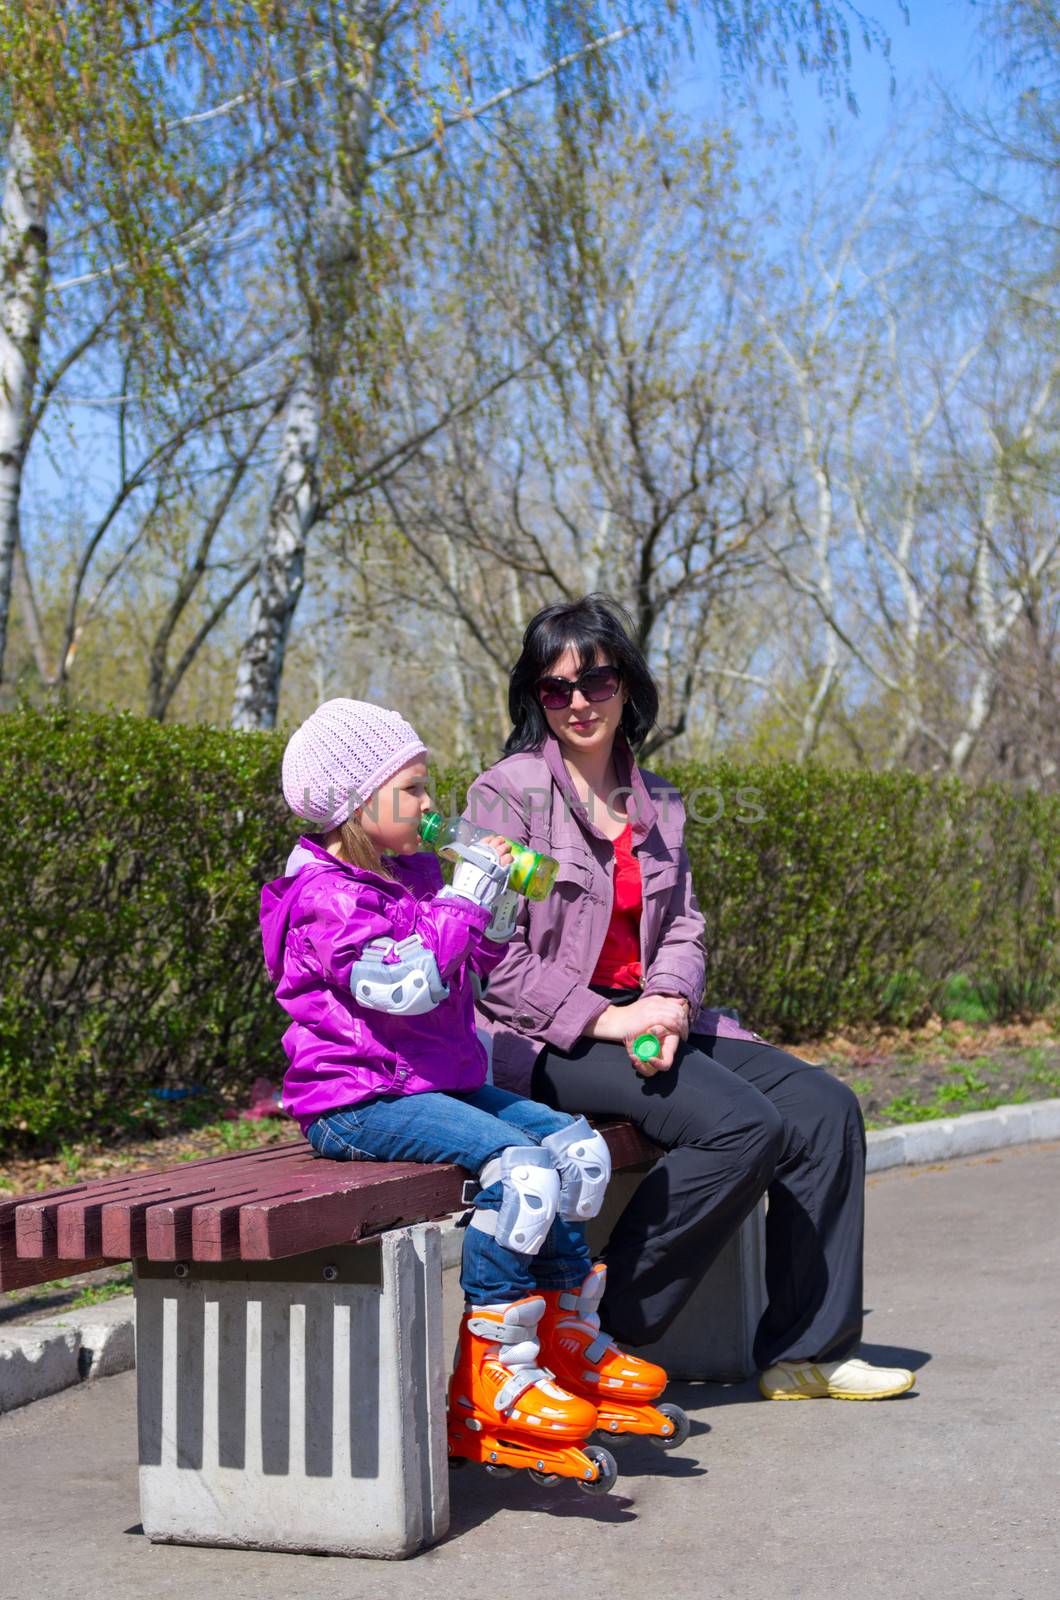 Little girl with her mother at park